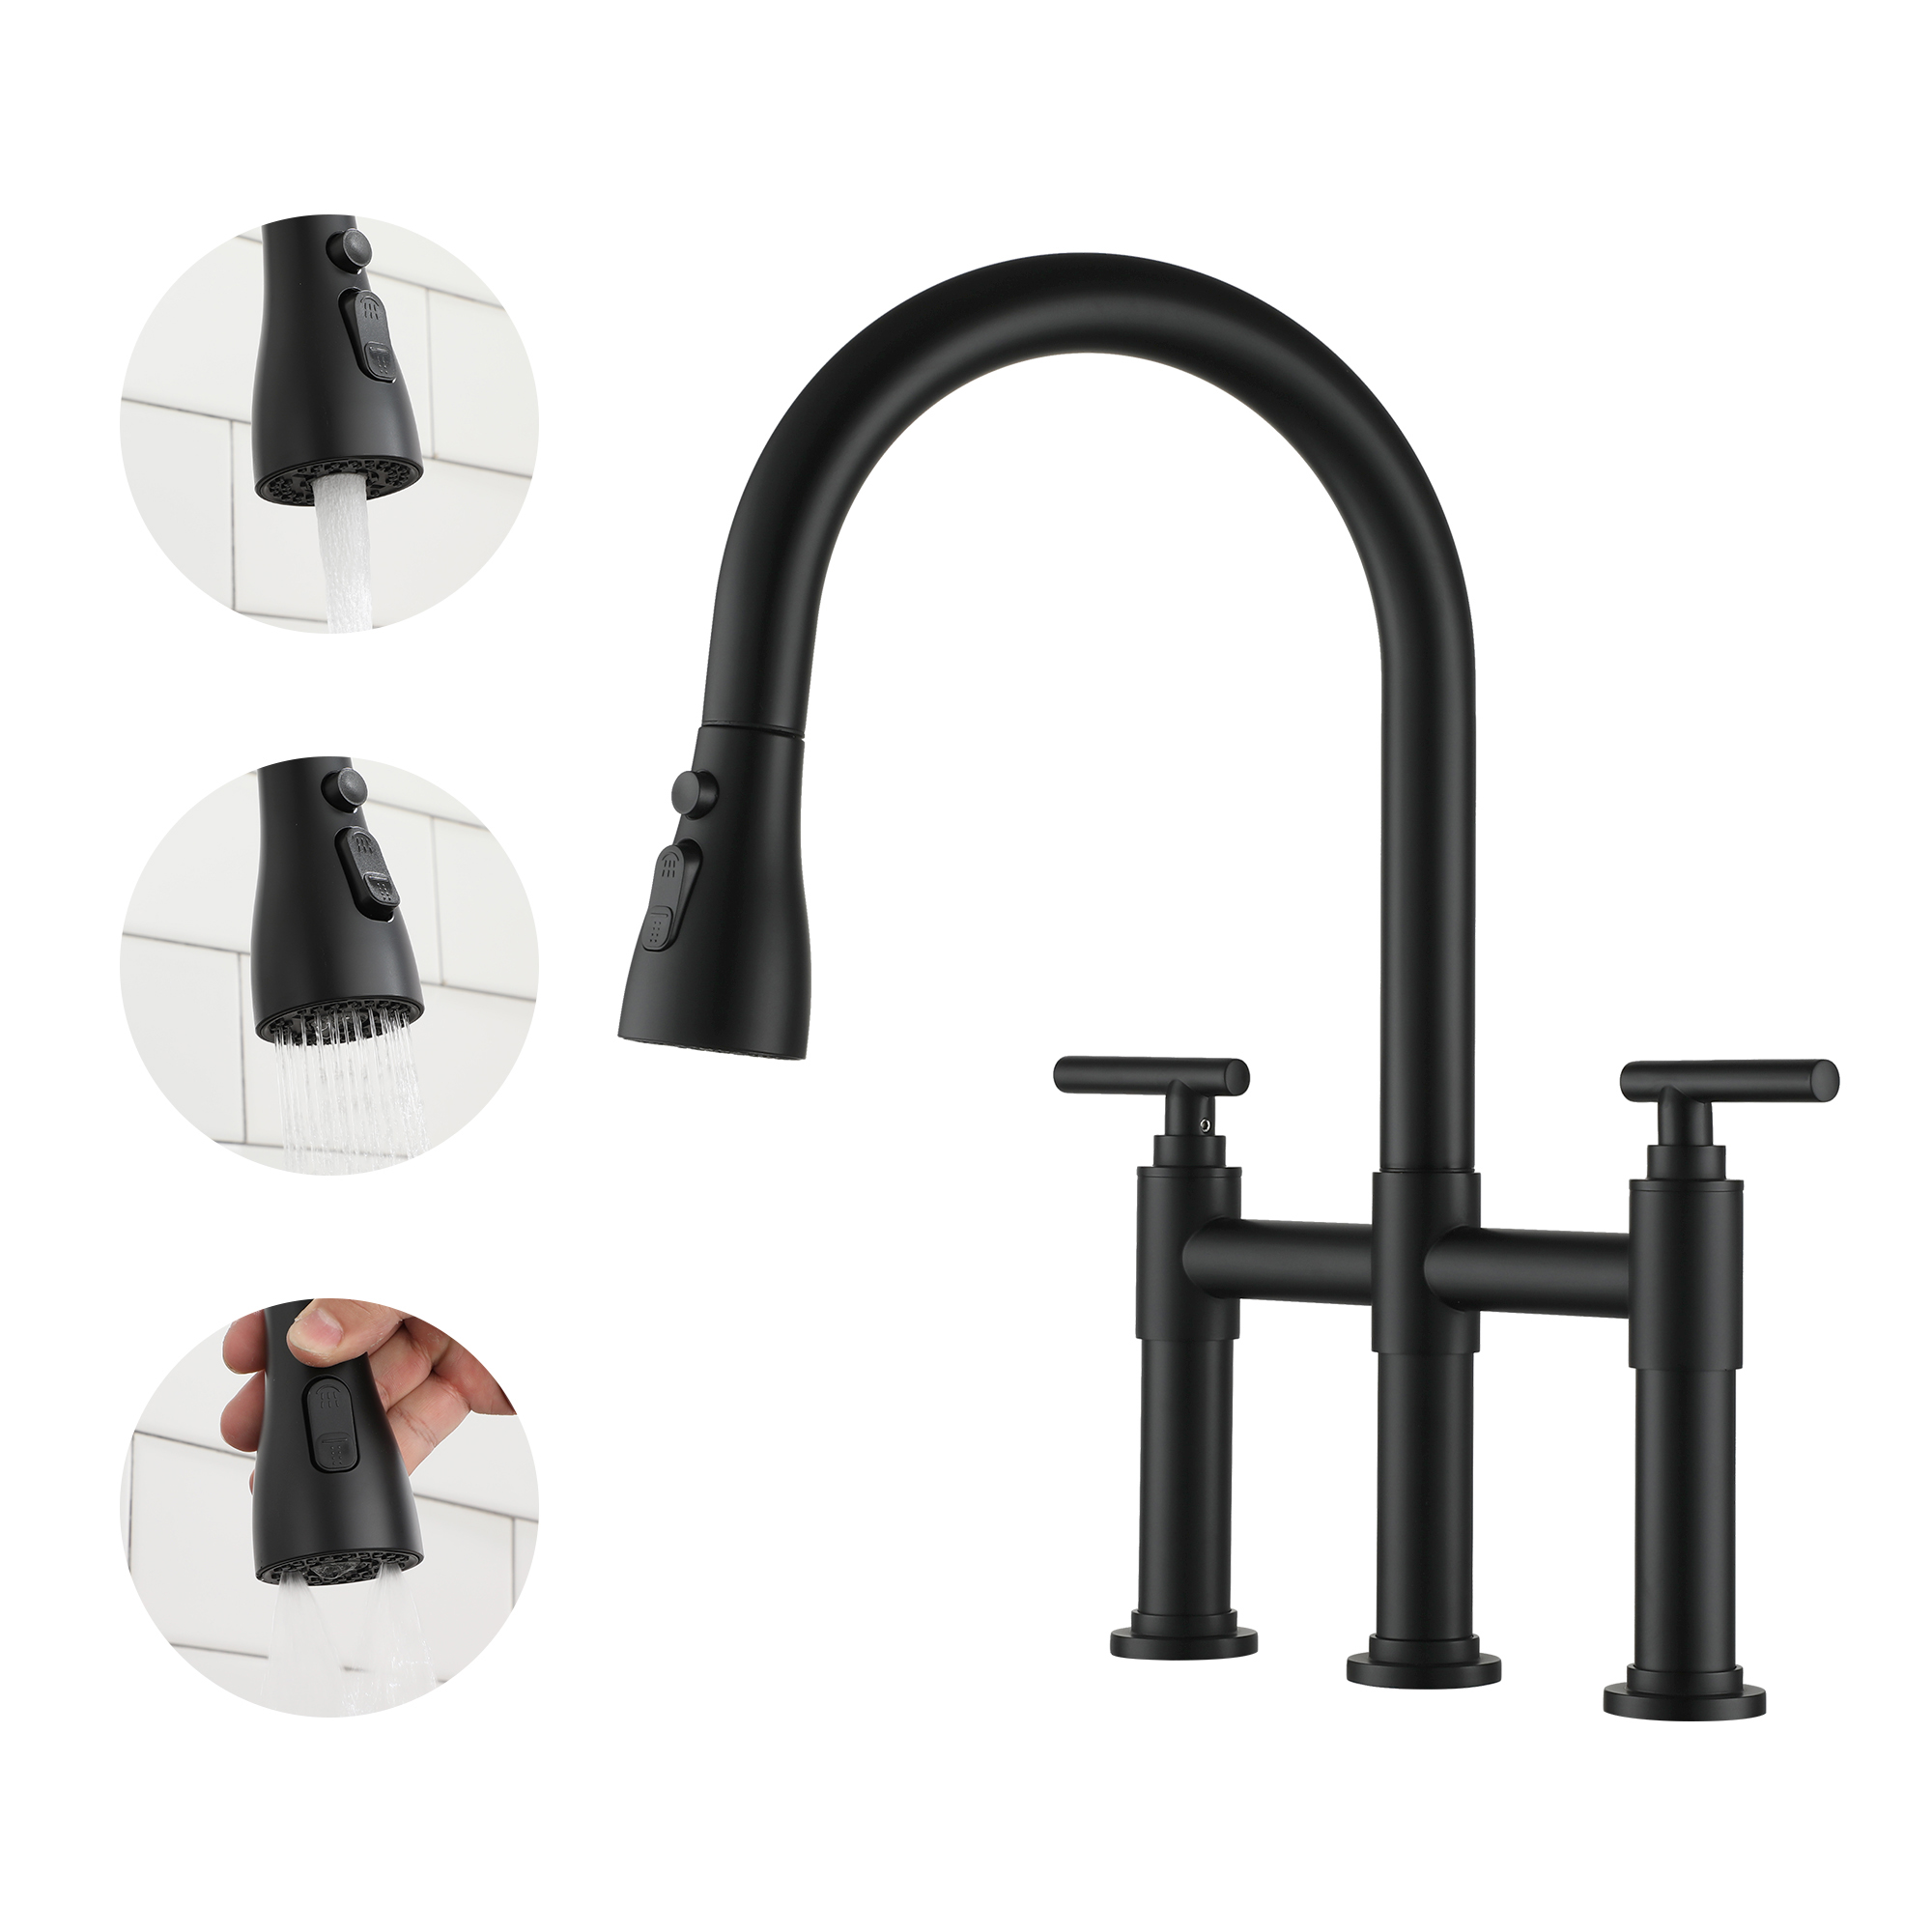 Bridge Kitchen Faucet with 3 Way Spray Function in Brushed Nickel Black White